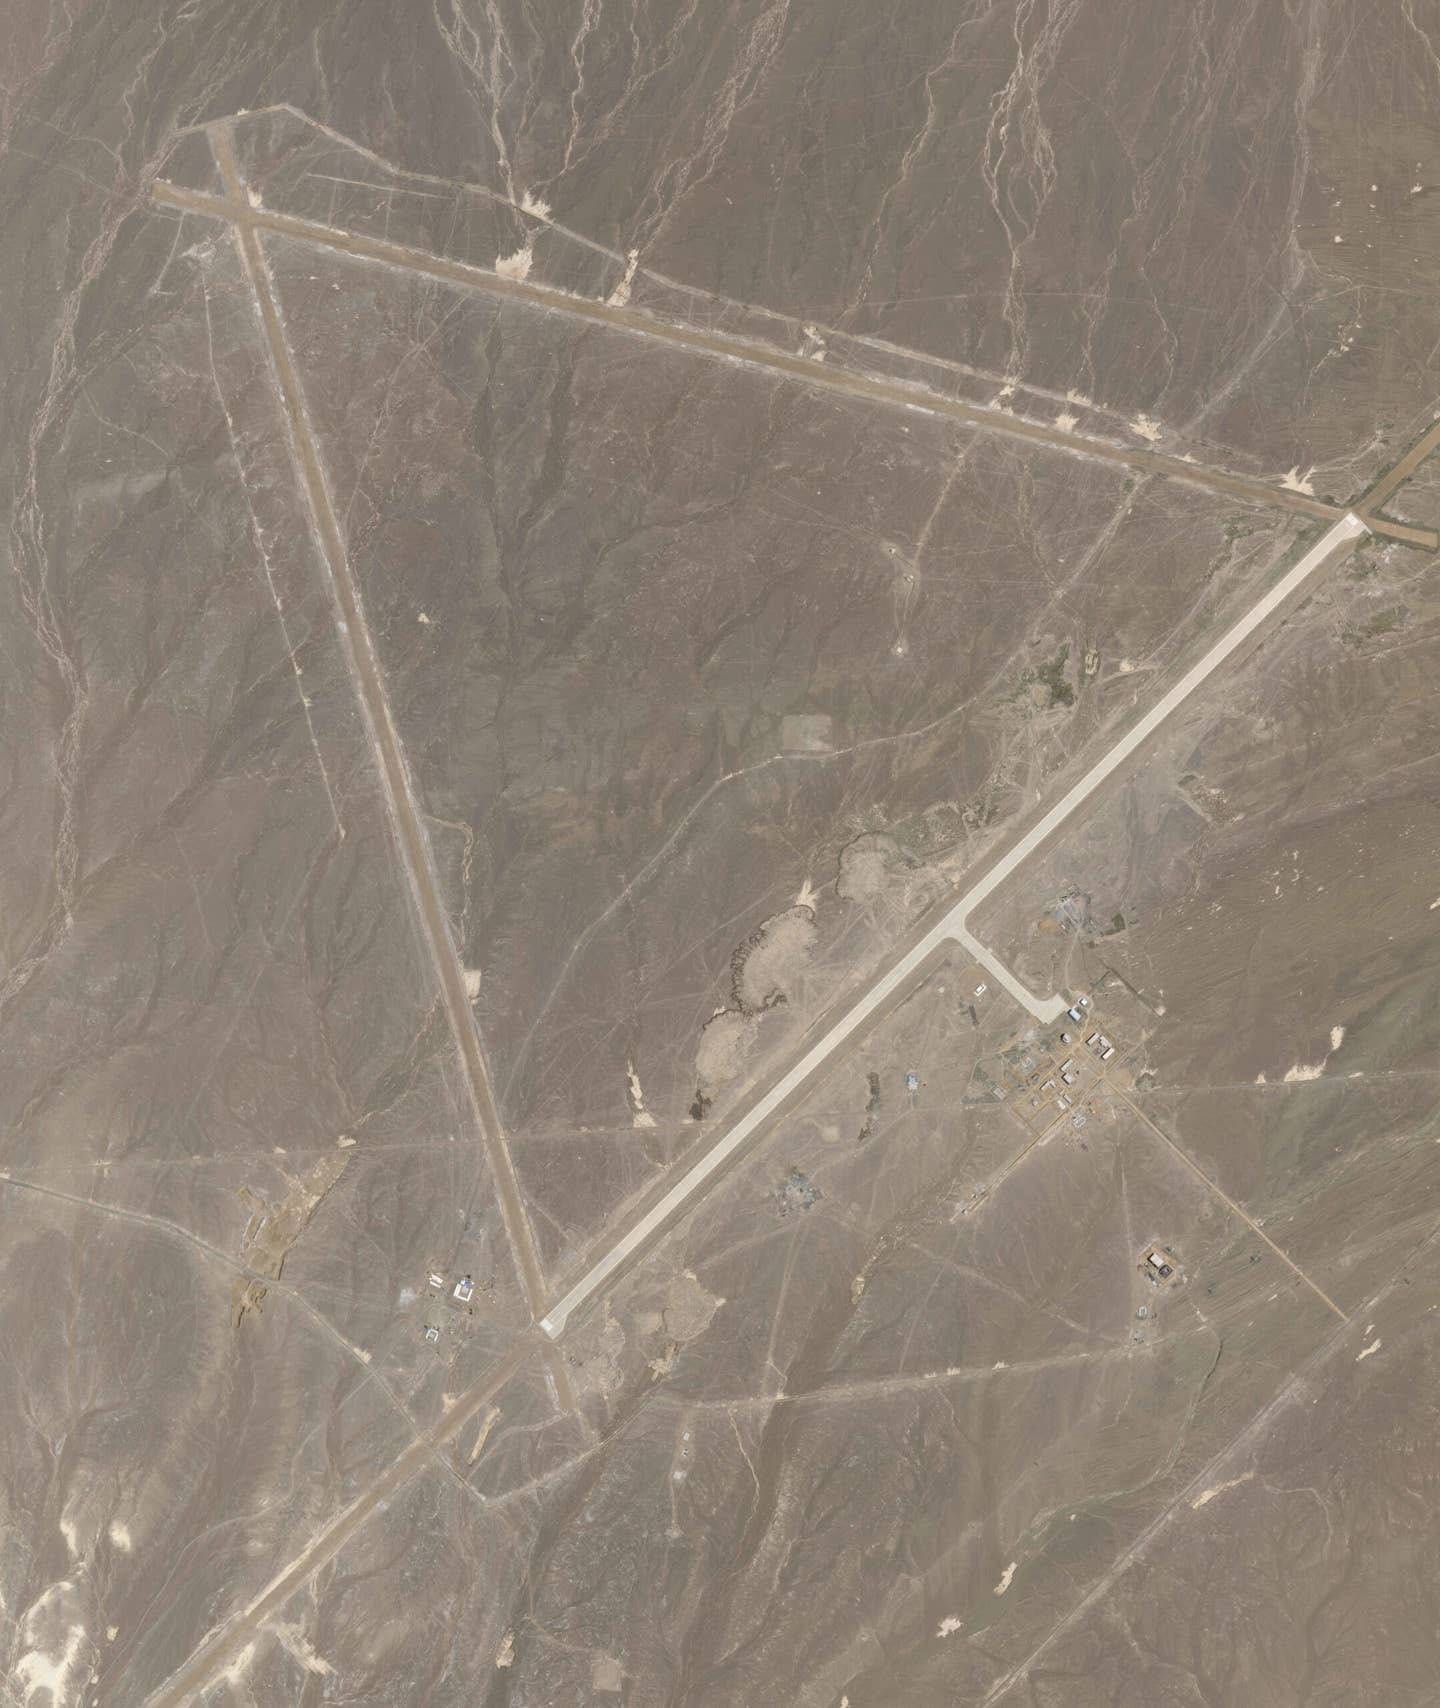 A general view of the entire air base near Lop Nor as of August 3, 2022. <em>PHOTO © 2022 PLANET LABS INC. ALL RIGHTS RESERVED. REPRINTED BY PERMISSION</em>